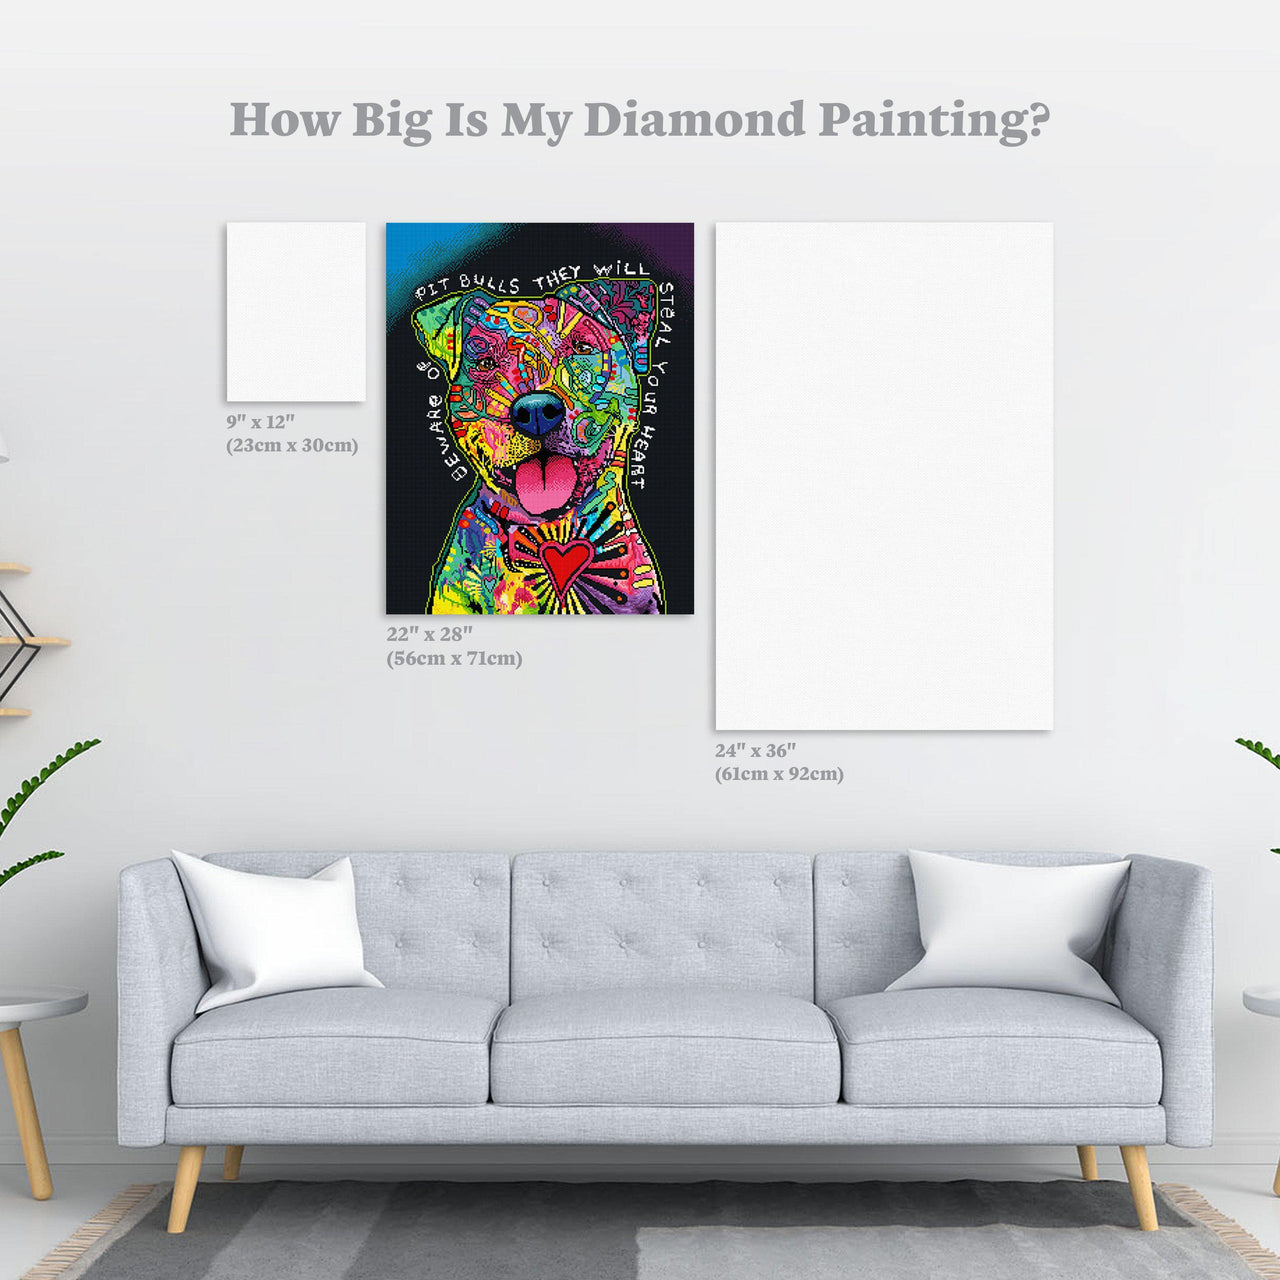 Diamond Painting Pit Bulls Will Steal Your Heart 22" x 28" (56cm x 71cm) / Square With 50 Colors Including 6 ABs / 62,101